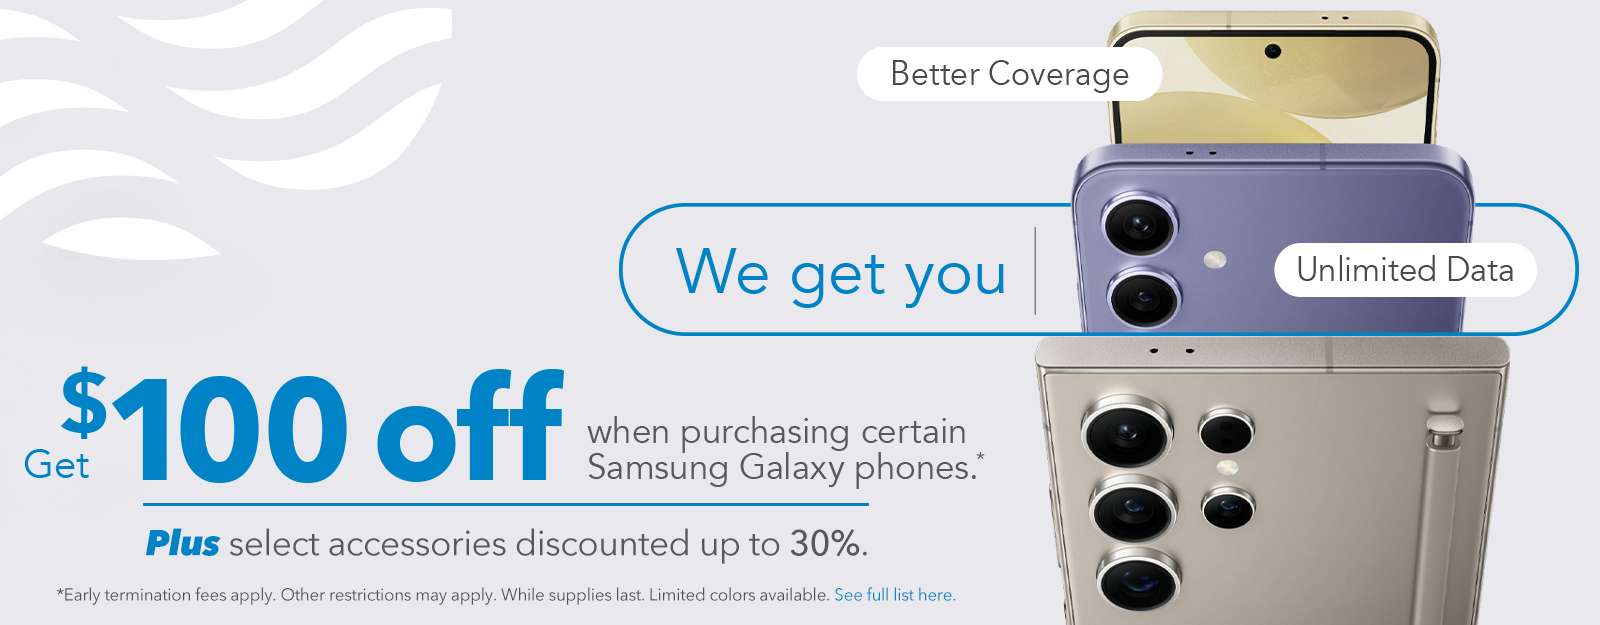 Get $100 off when purchasing certain Samsung Galaxy phones. (Early termination fees apply. Other restrictions may apply. While supplies last. Limited colors available)